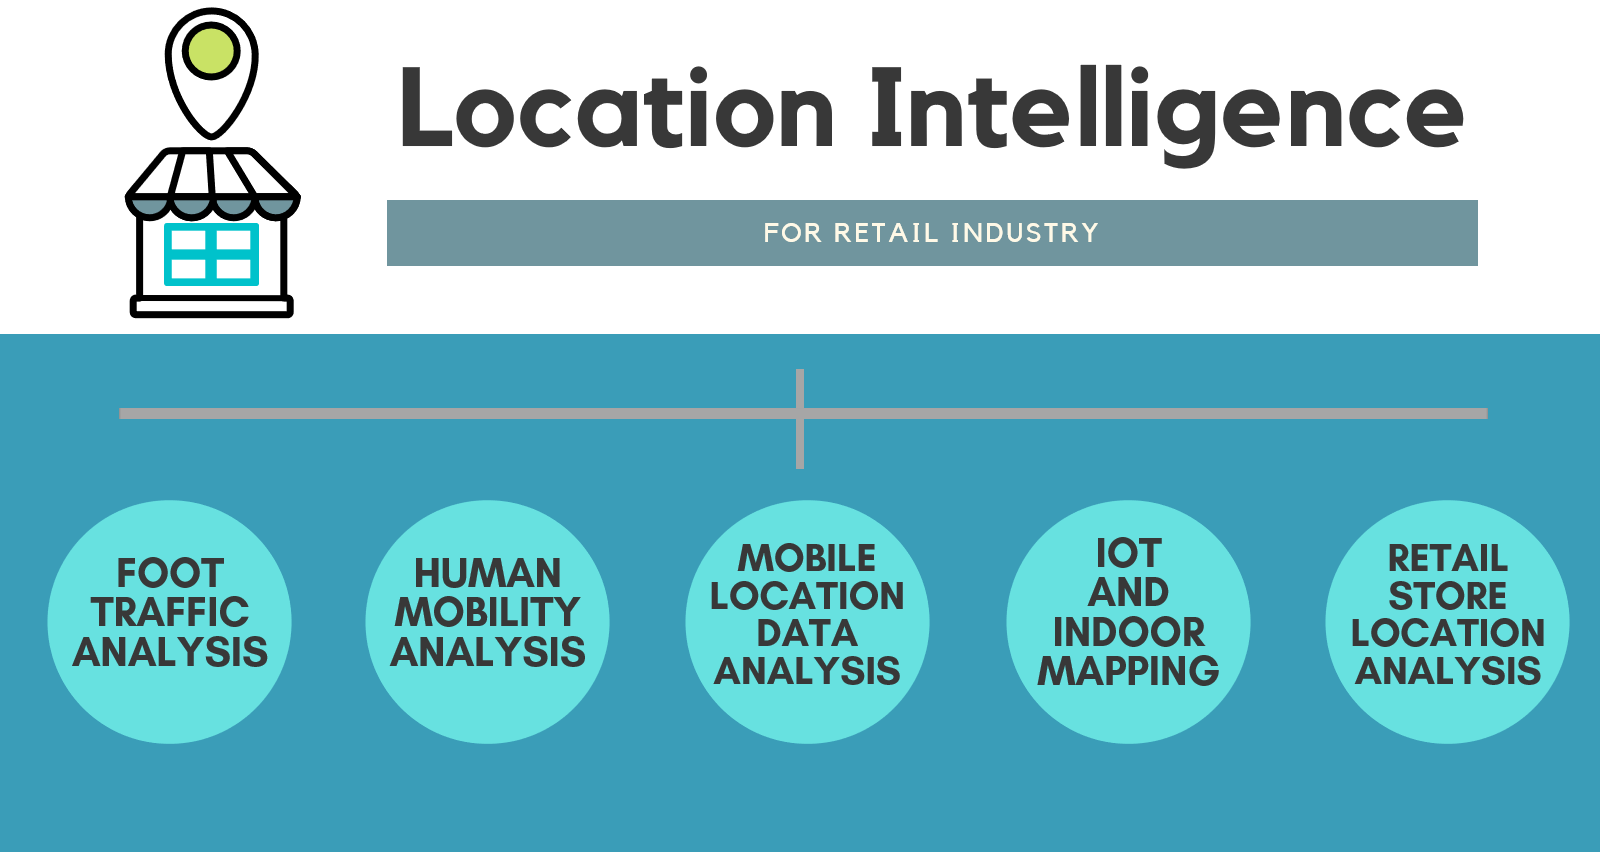 The value of location intelligence for retailers